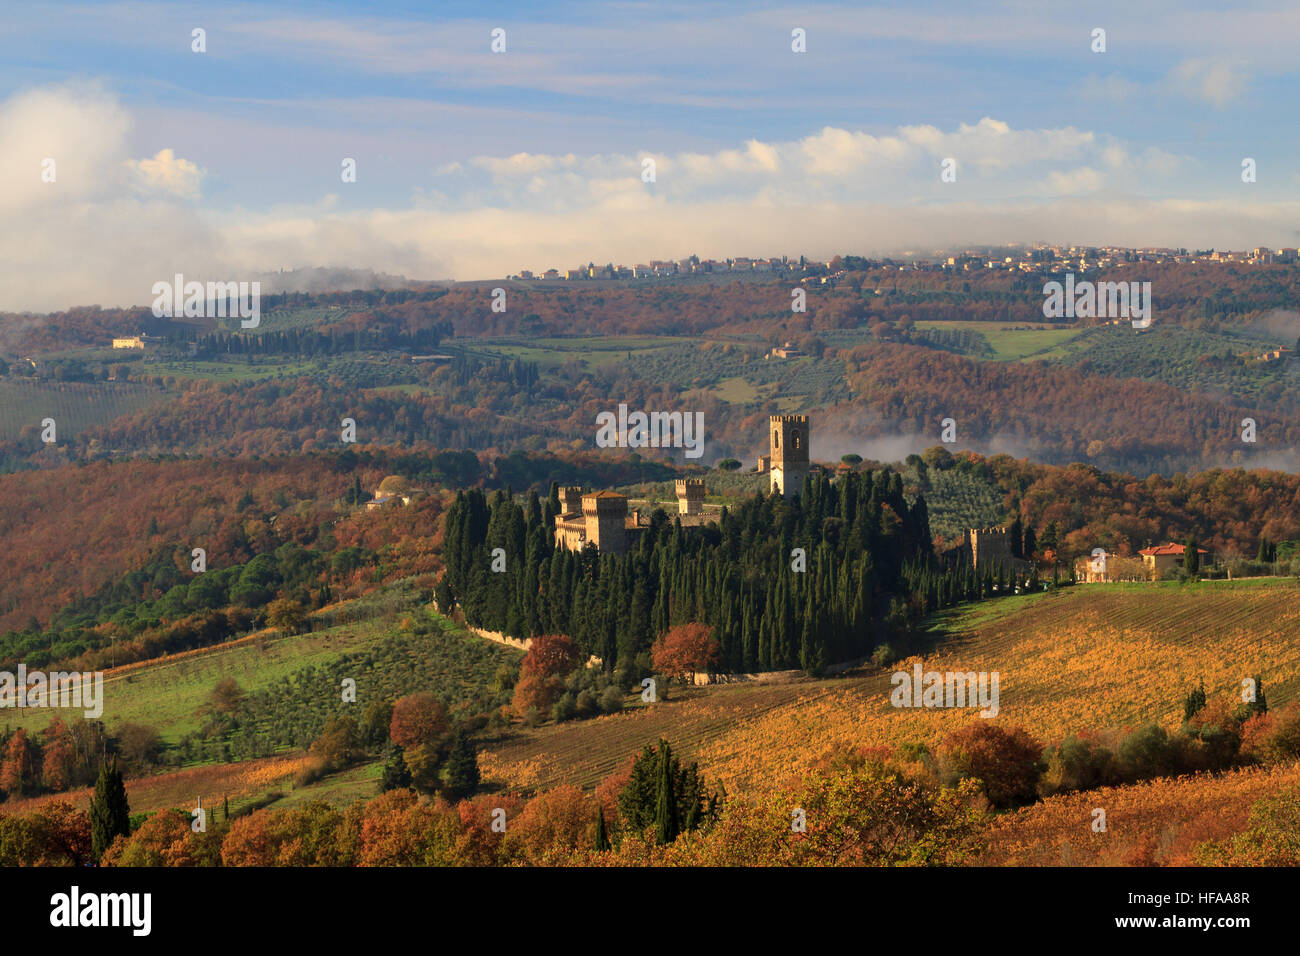 Tavarnelle Val di Pesa, November 2016: Abbey of Passignano and vineyard landscape in autumn with fog, on November 2016 in Tavarnelle Val di Pesa, Ital Stock Photo